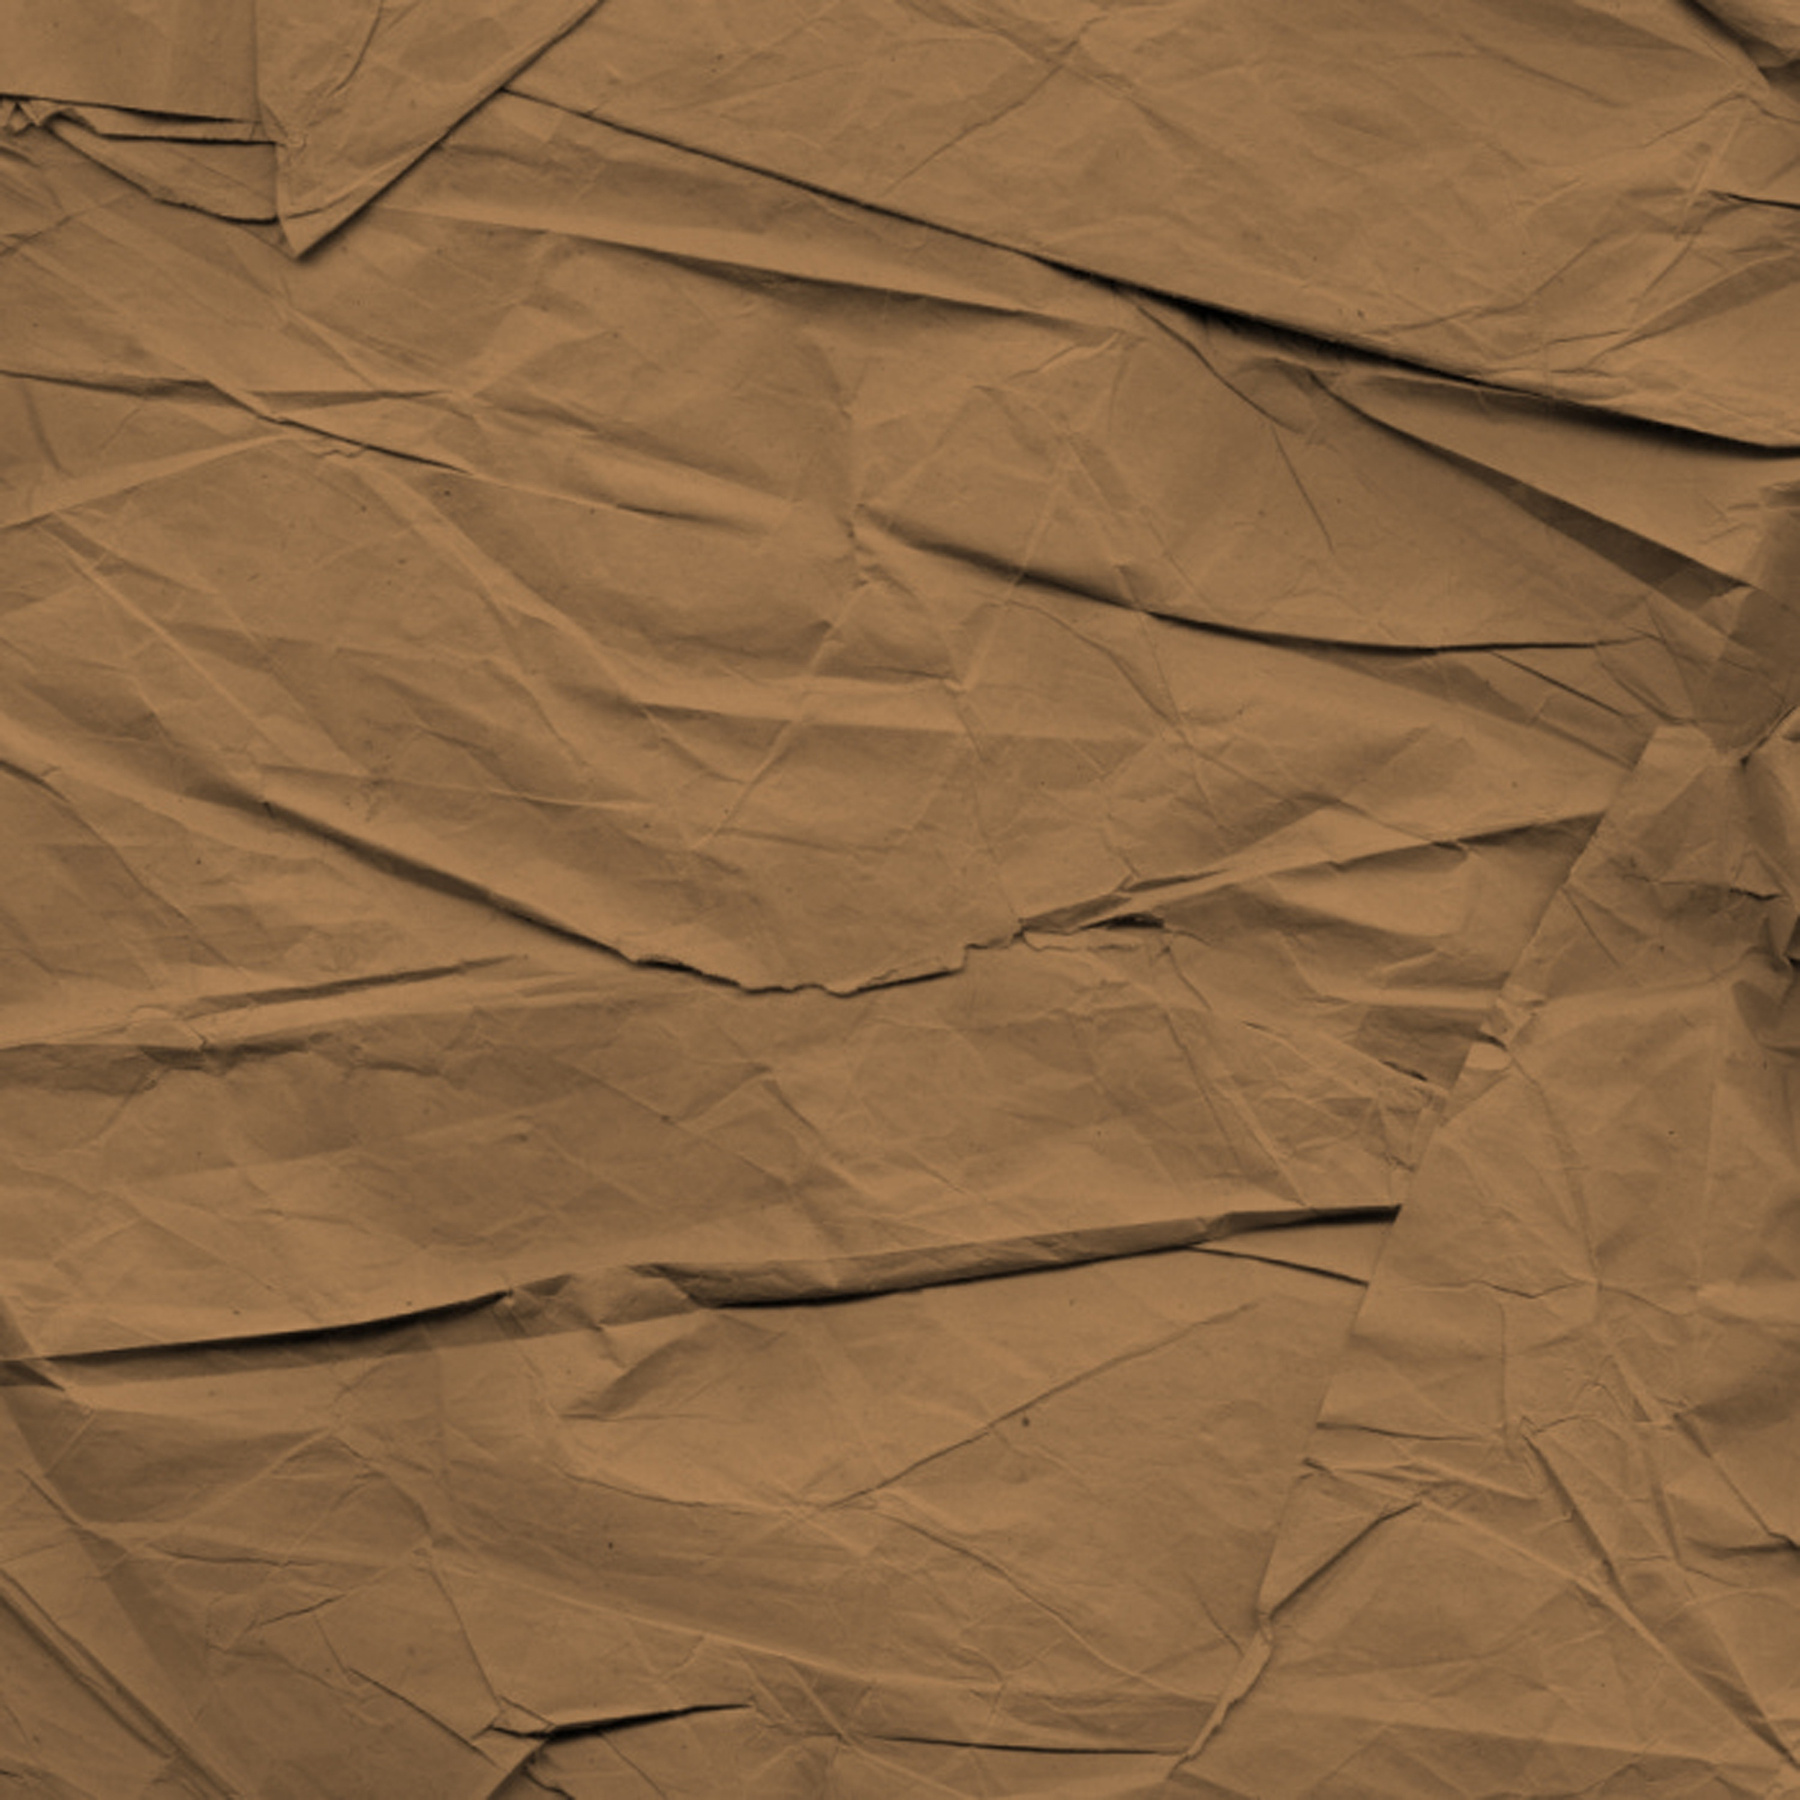 Background Pattern of Folded Brown Paper